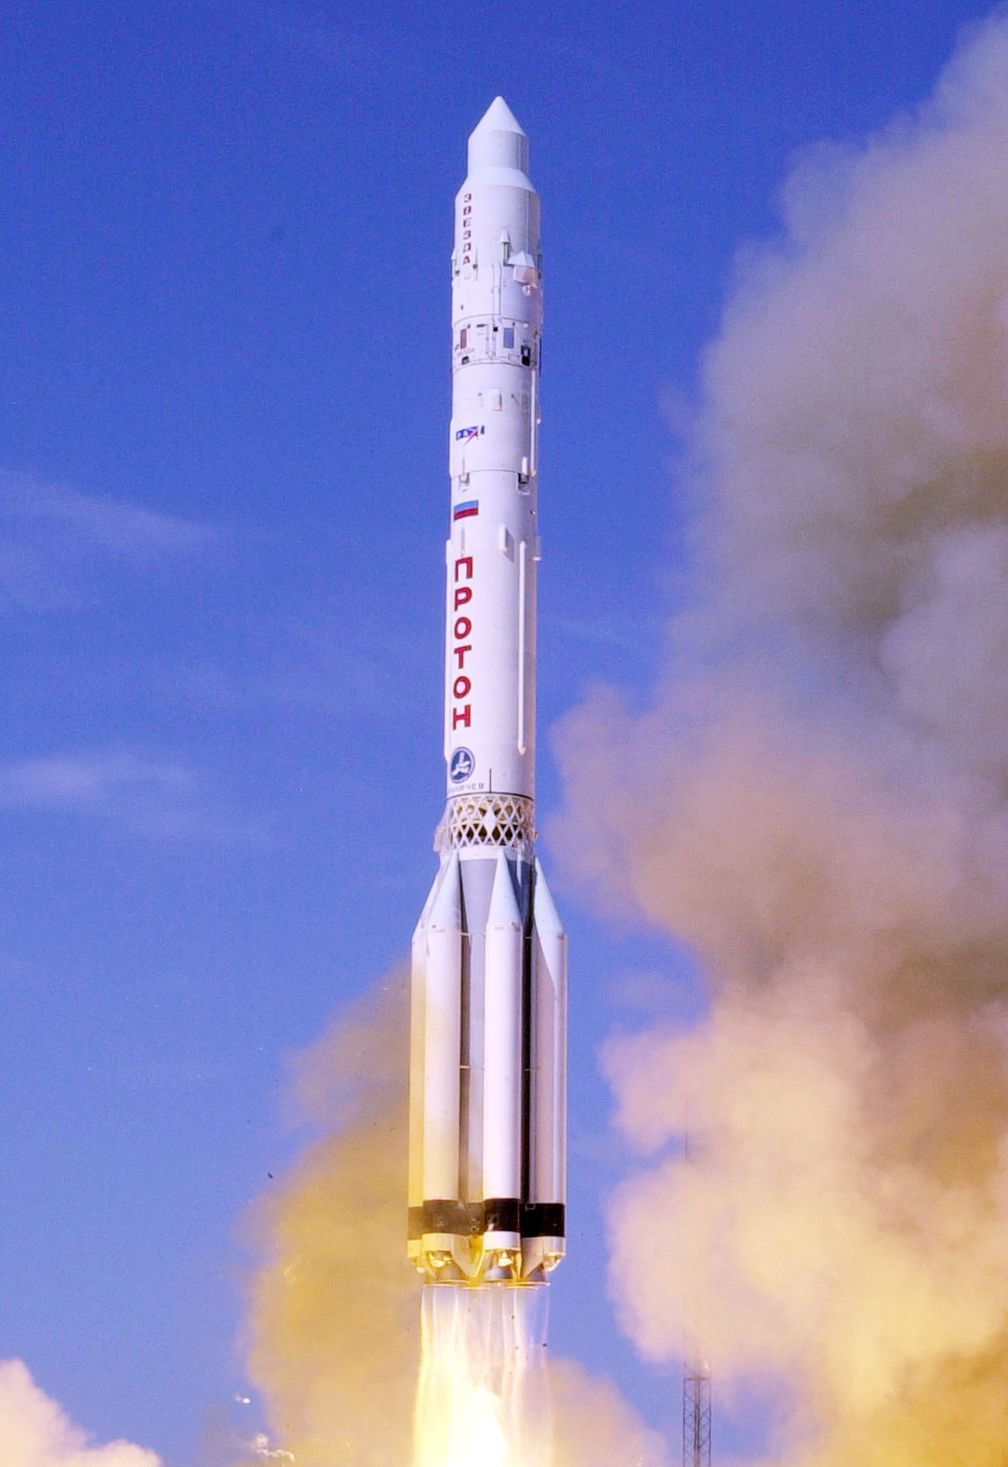 Proton rockets are the heavylift workhorse of Russian space industry